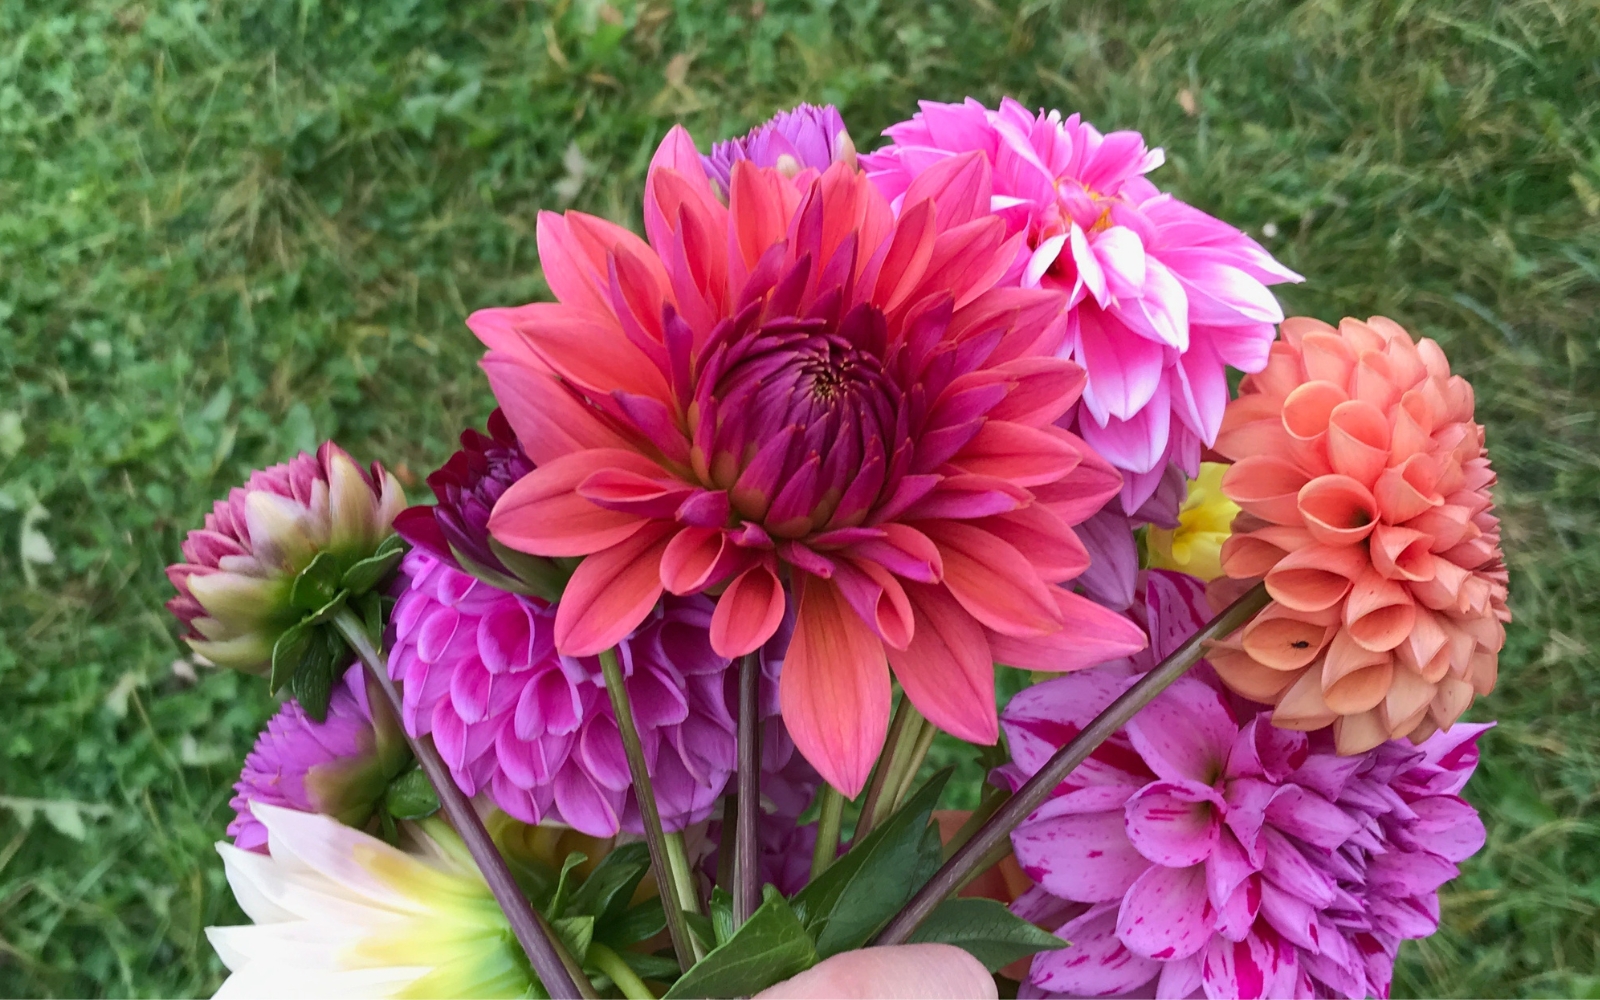 bouquet of dahlias held in a hand